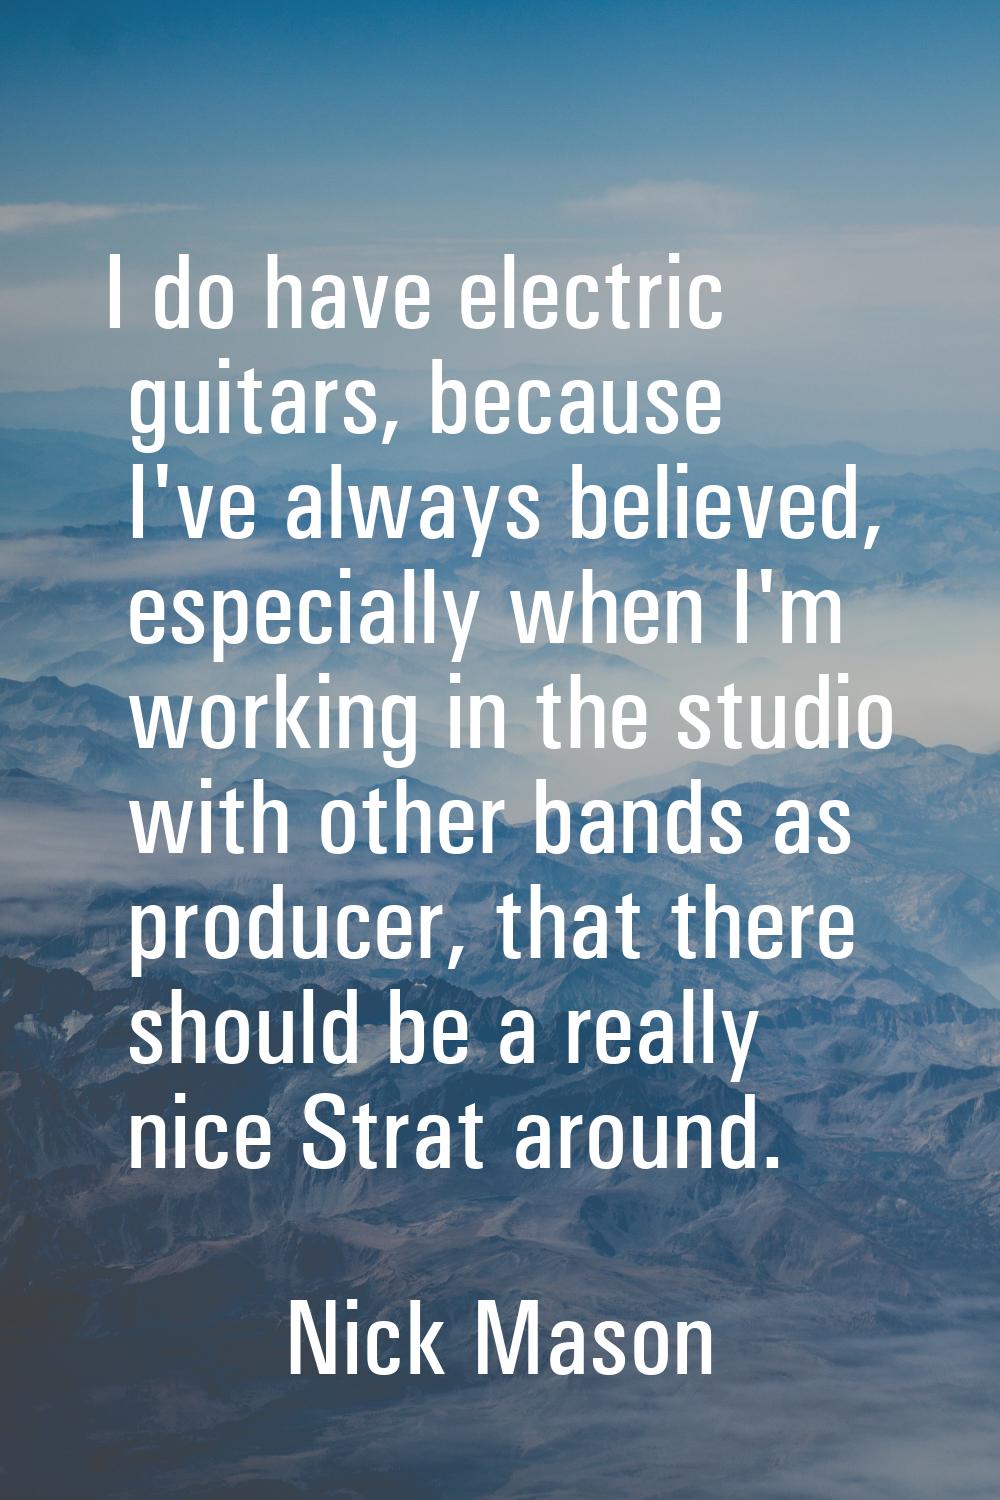 I do have electric guitars, because I've always believed, especially when I'm working in the studio